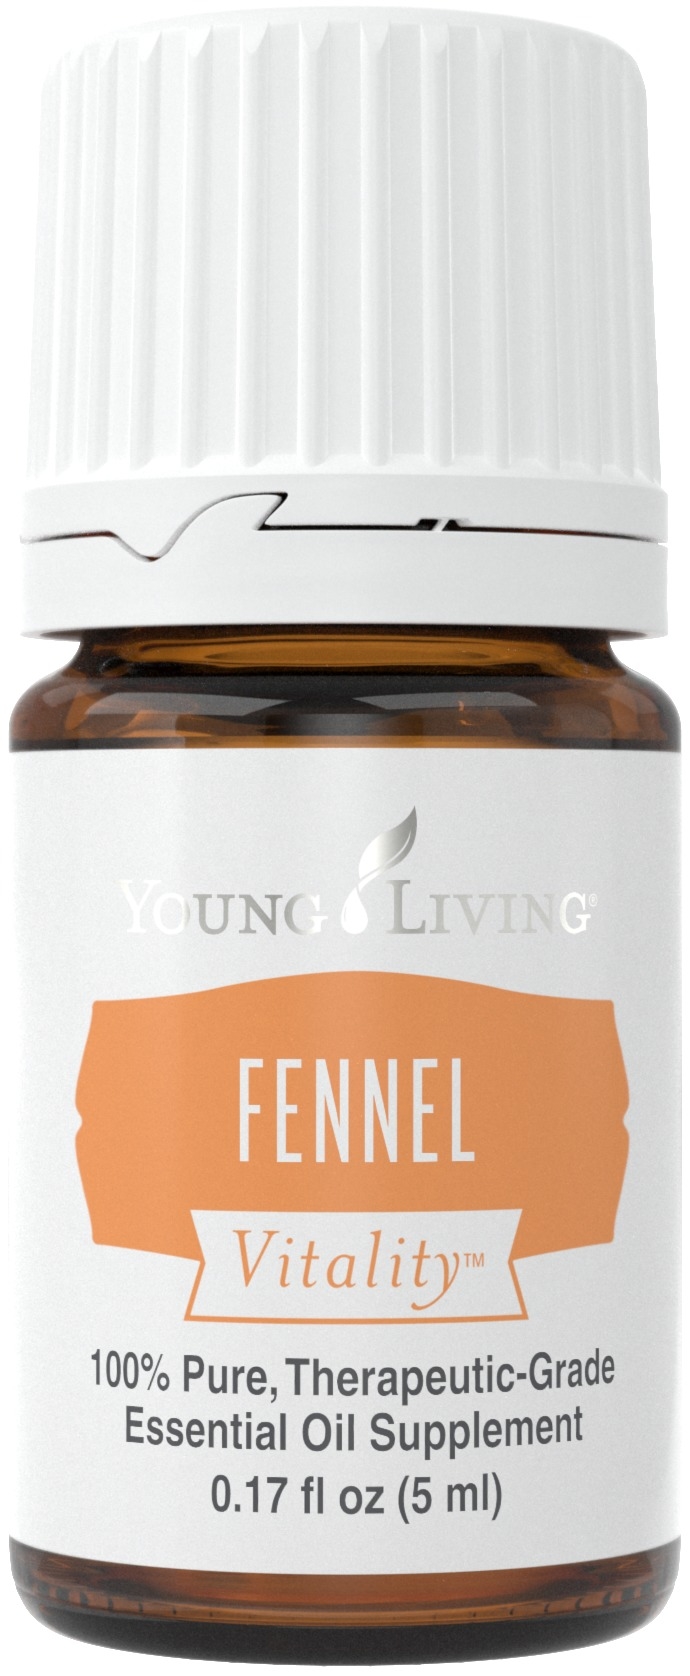 Fennel Vitality essential oil